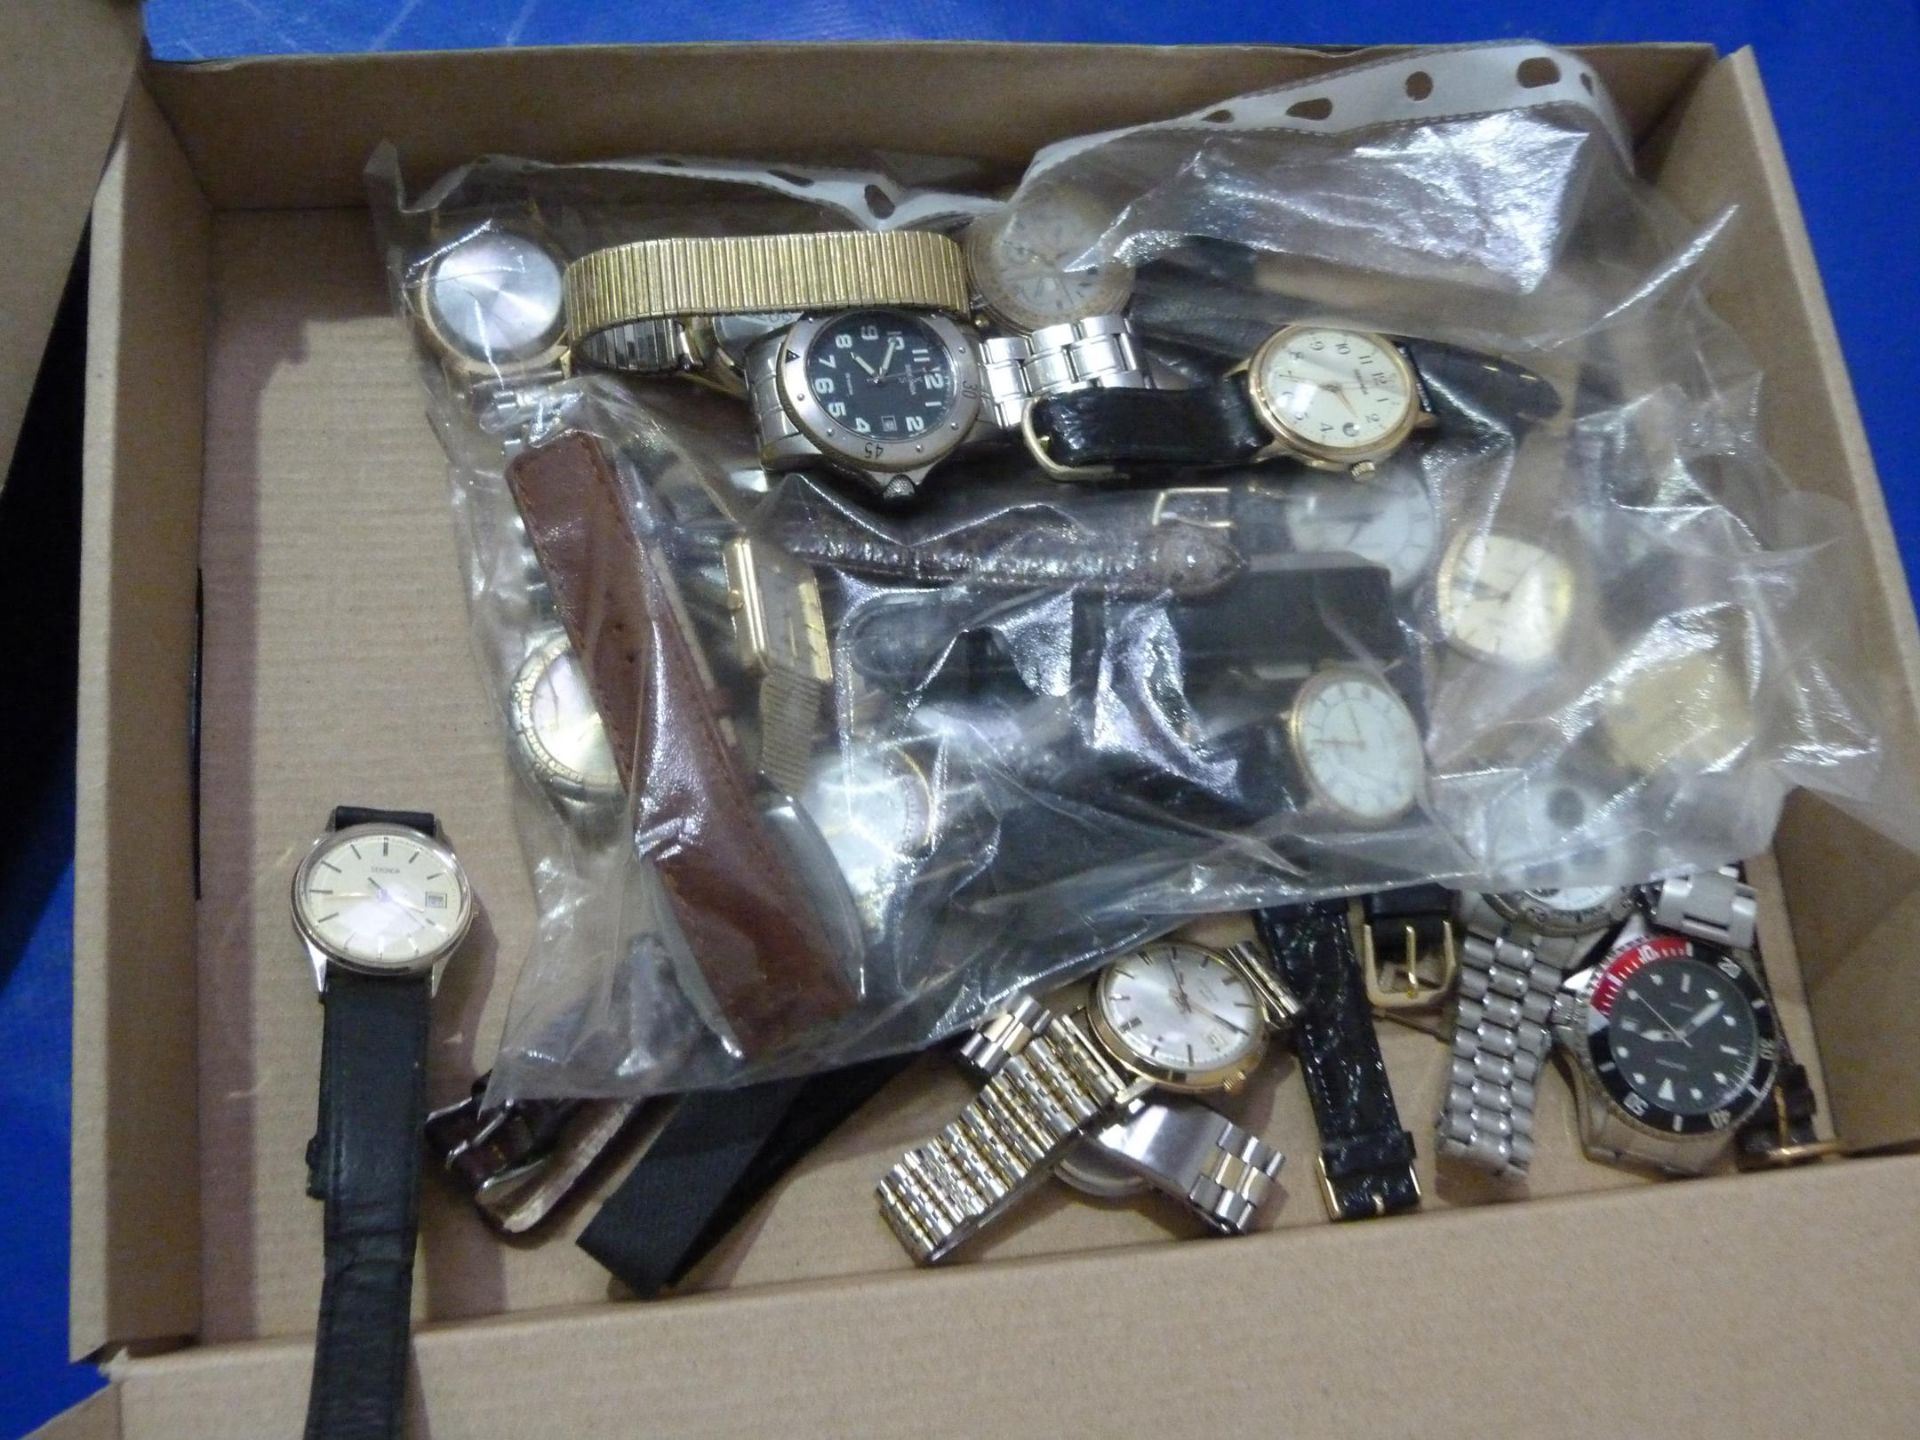 * Two Boxes to contain an Assortment of Watches from Ingersol, Seconda, Aqua, Smiths etc. (some in